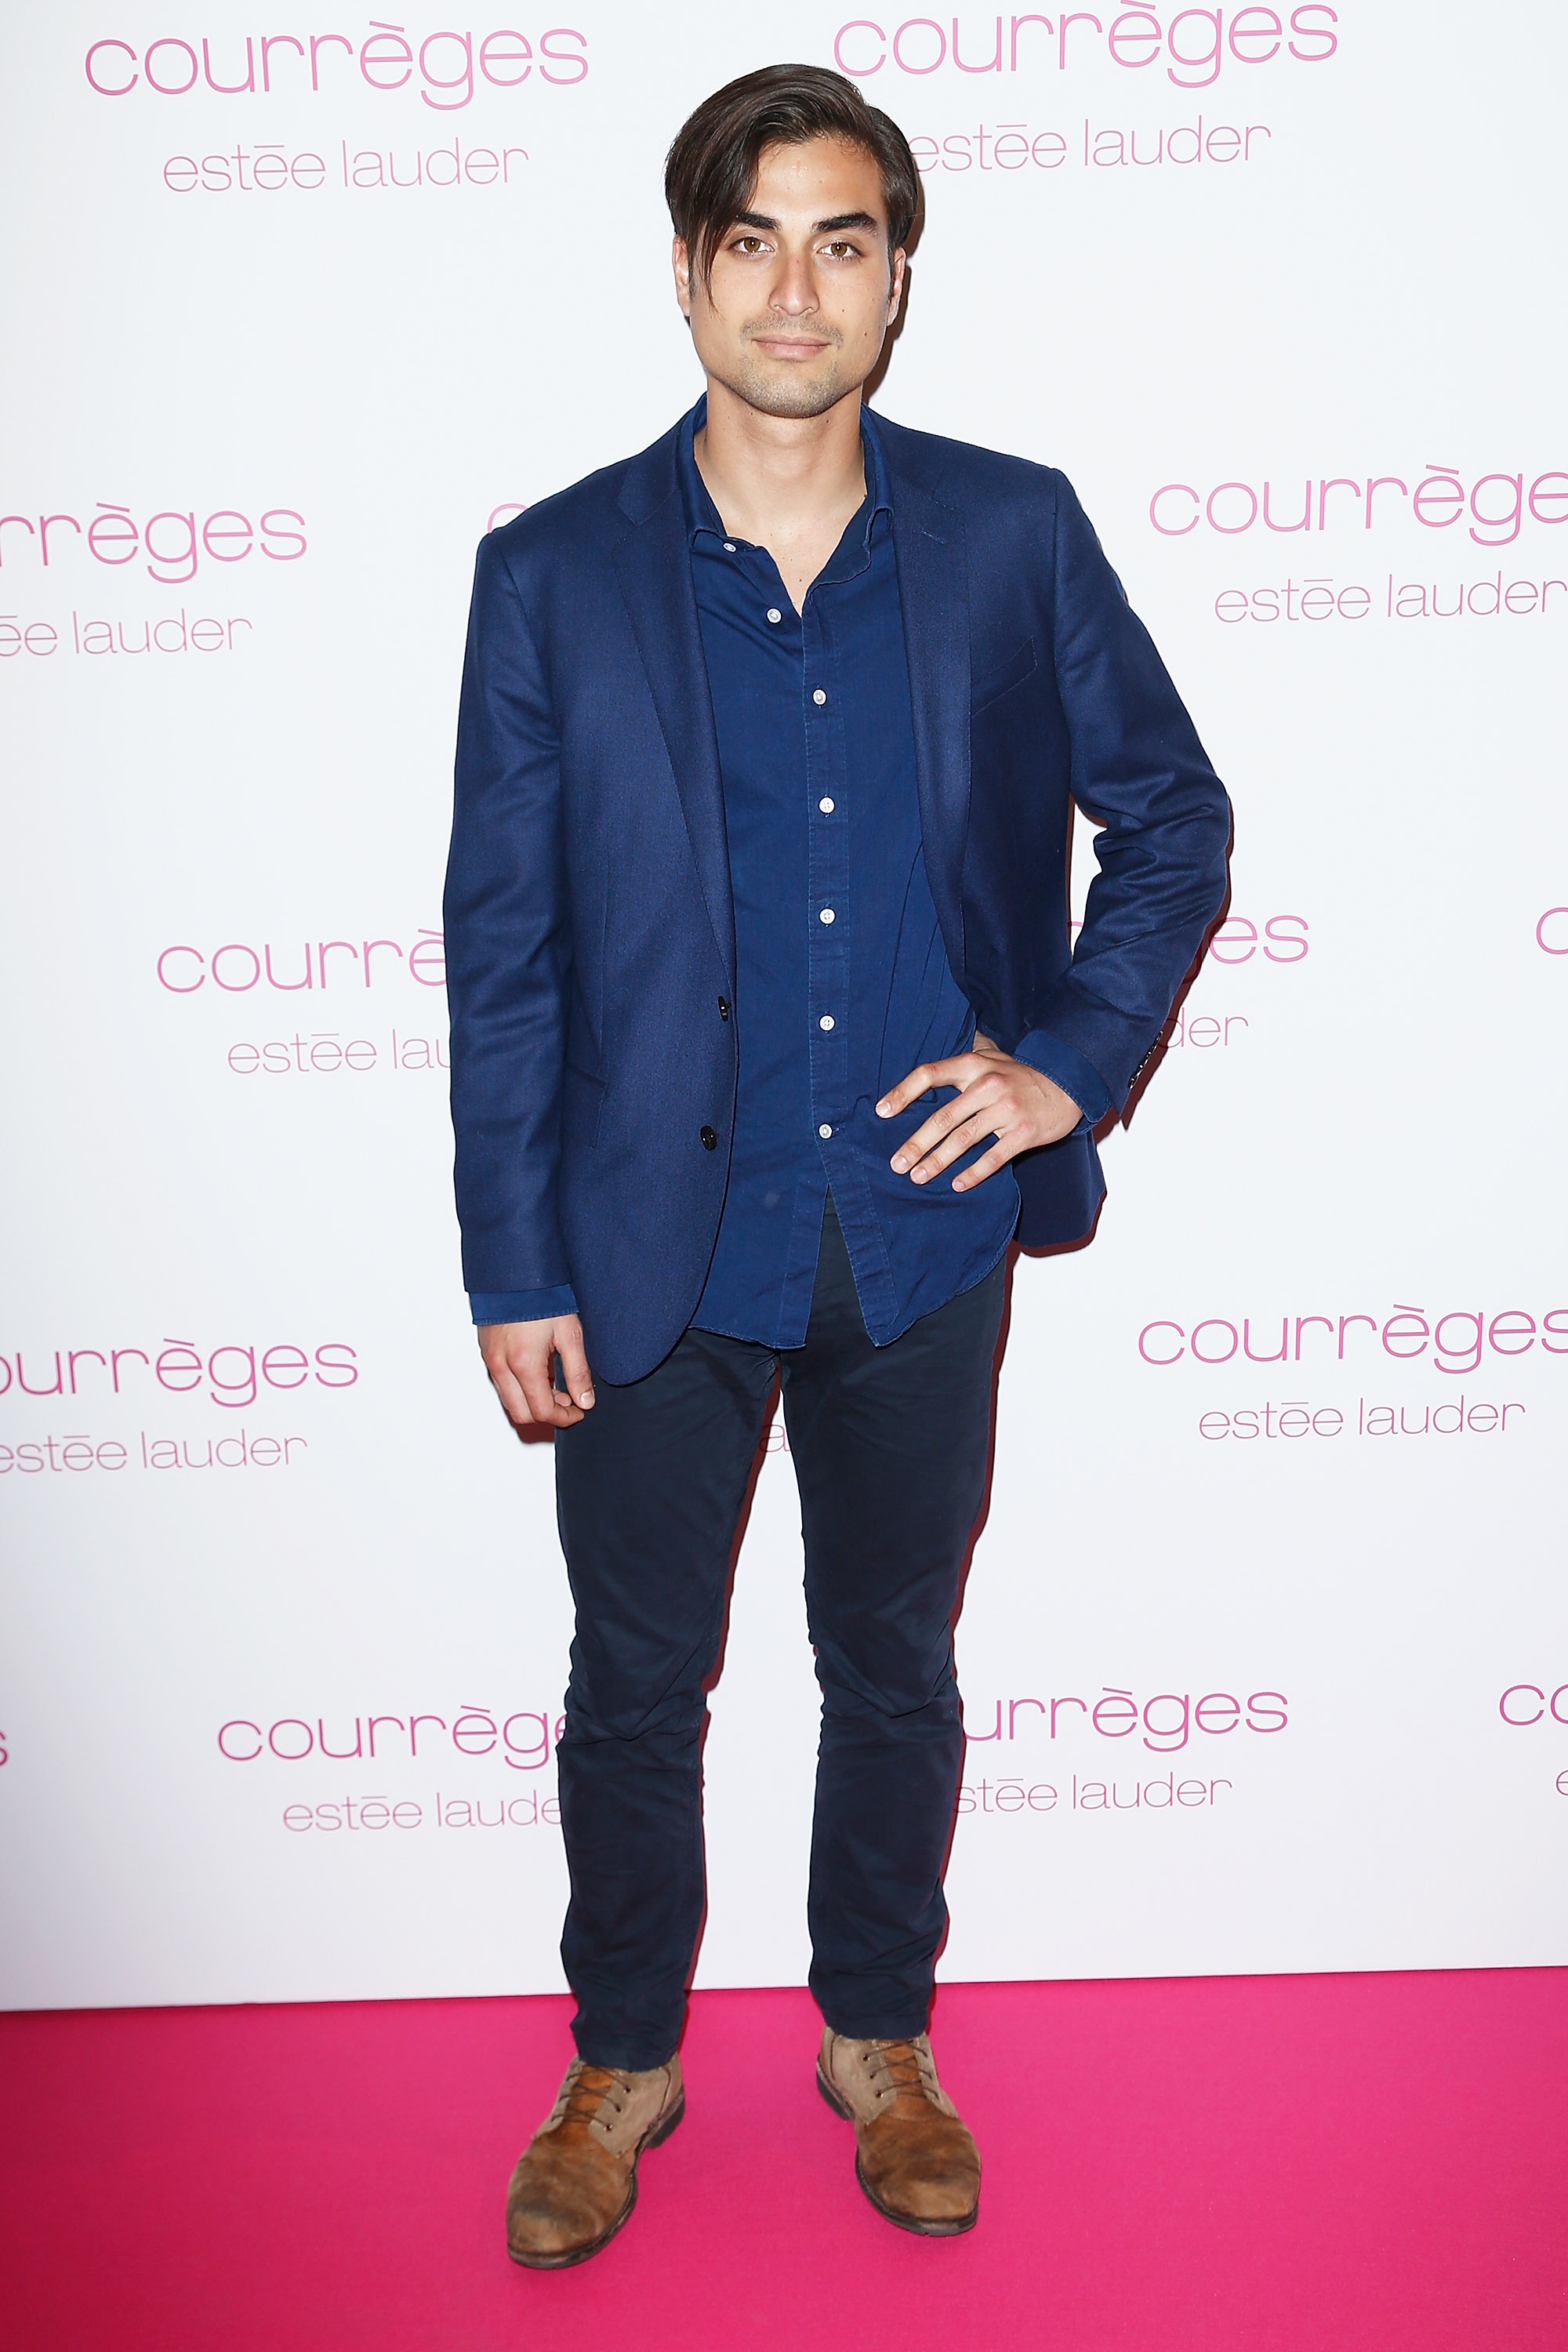 Model Tuki Brando at the Courreges and Estee Lauder dinner party during Paris Fashion Week on March 7, 2015, in Paris, France | Source: Getty Images